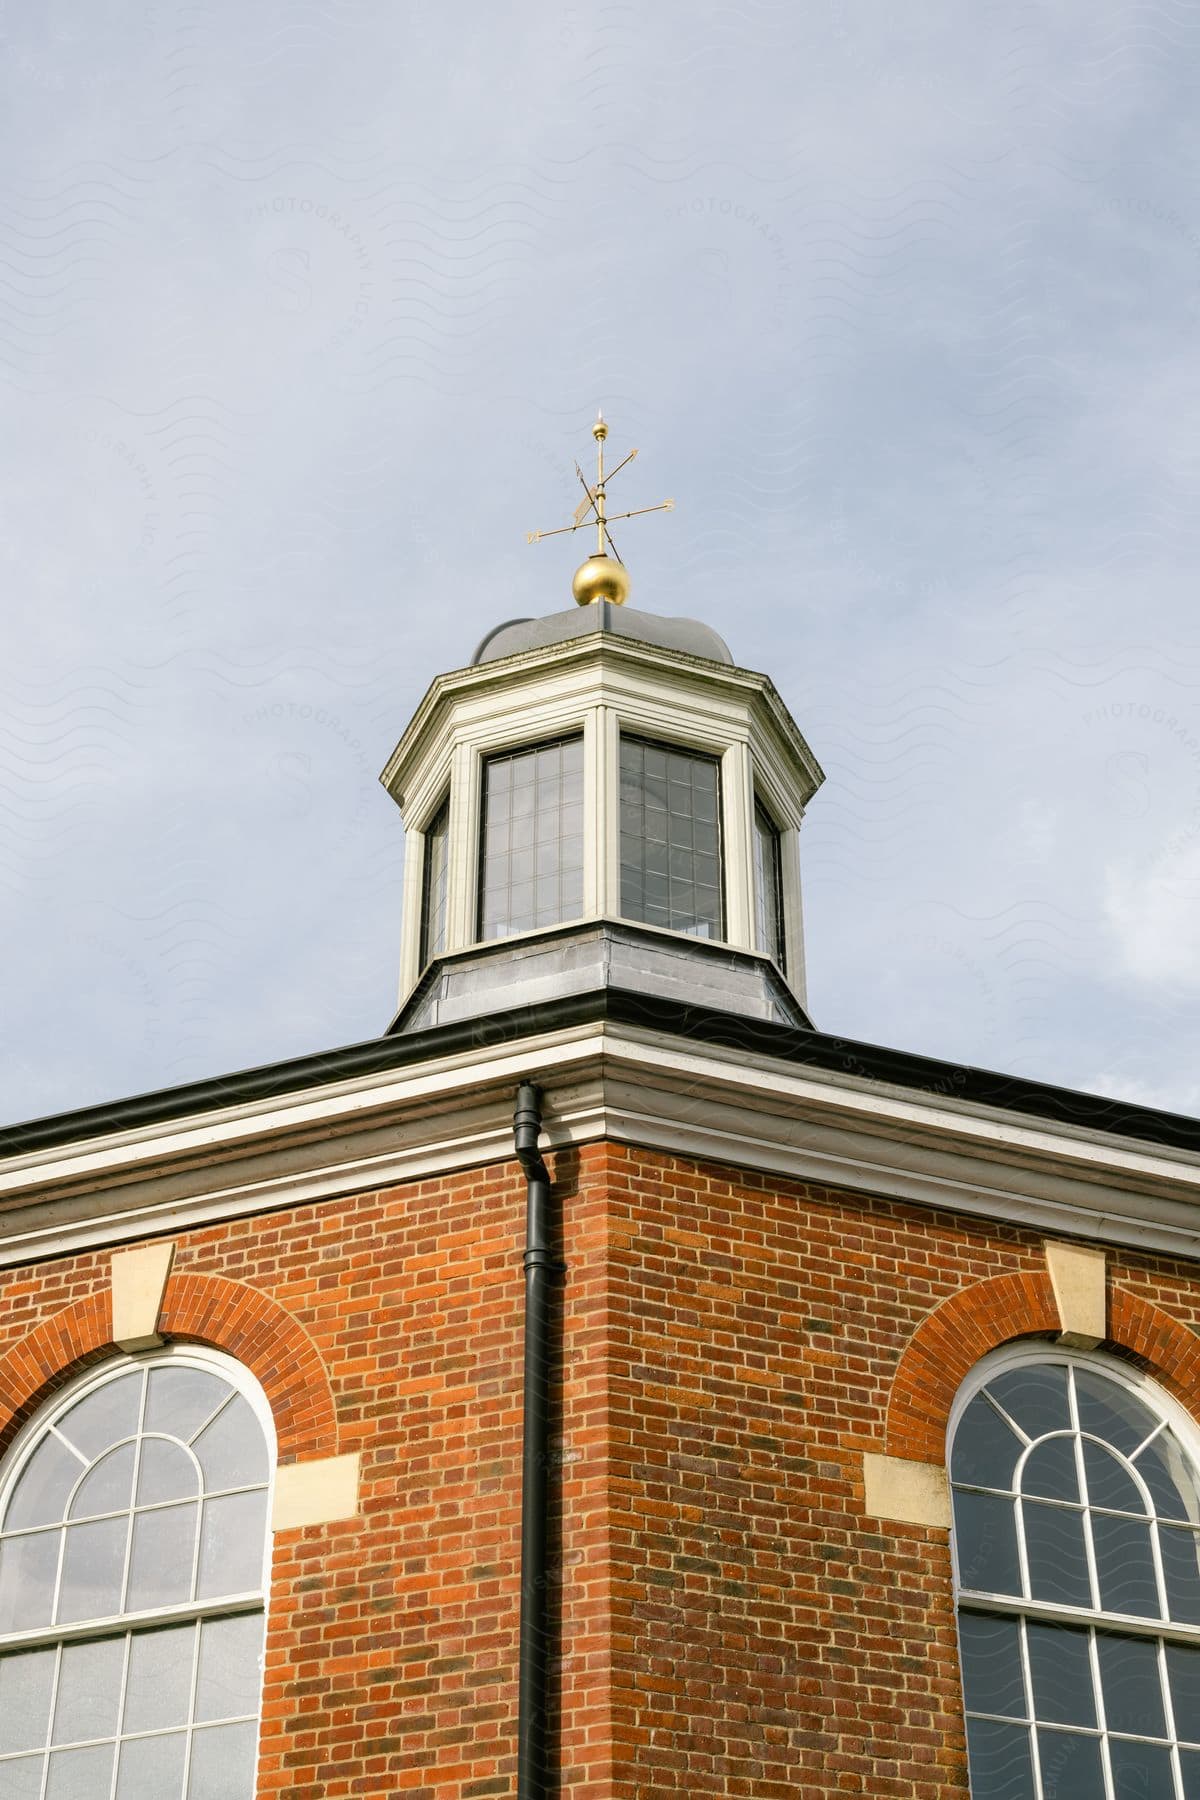 Top of a brick building with windows and a small domed tower and a golden weather vane against a blue sky with clouds.